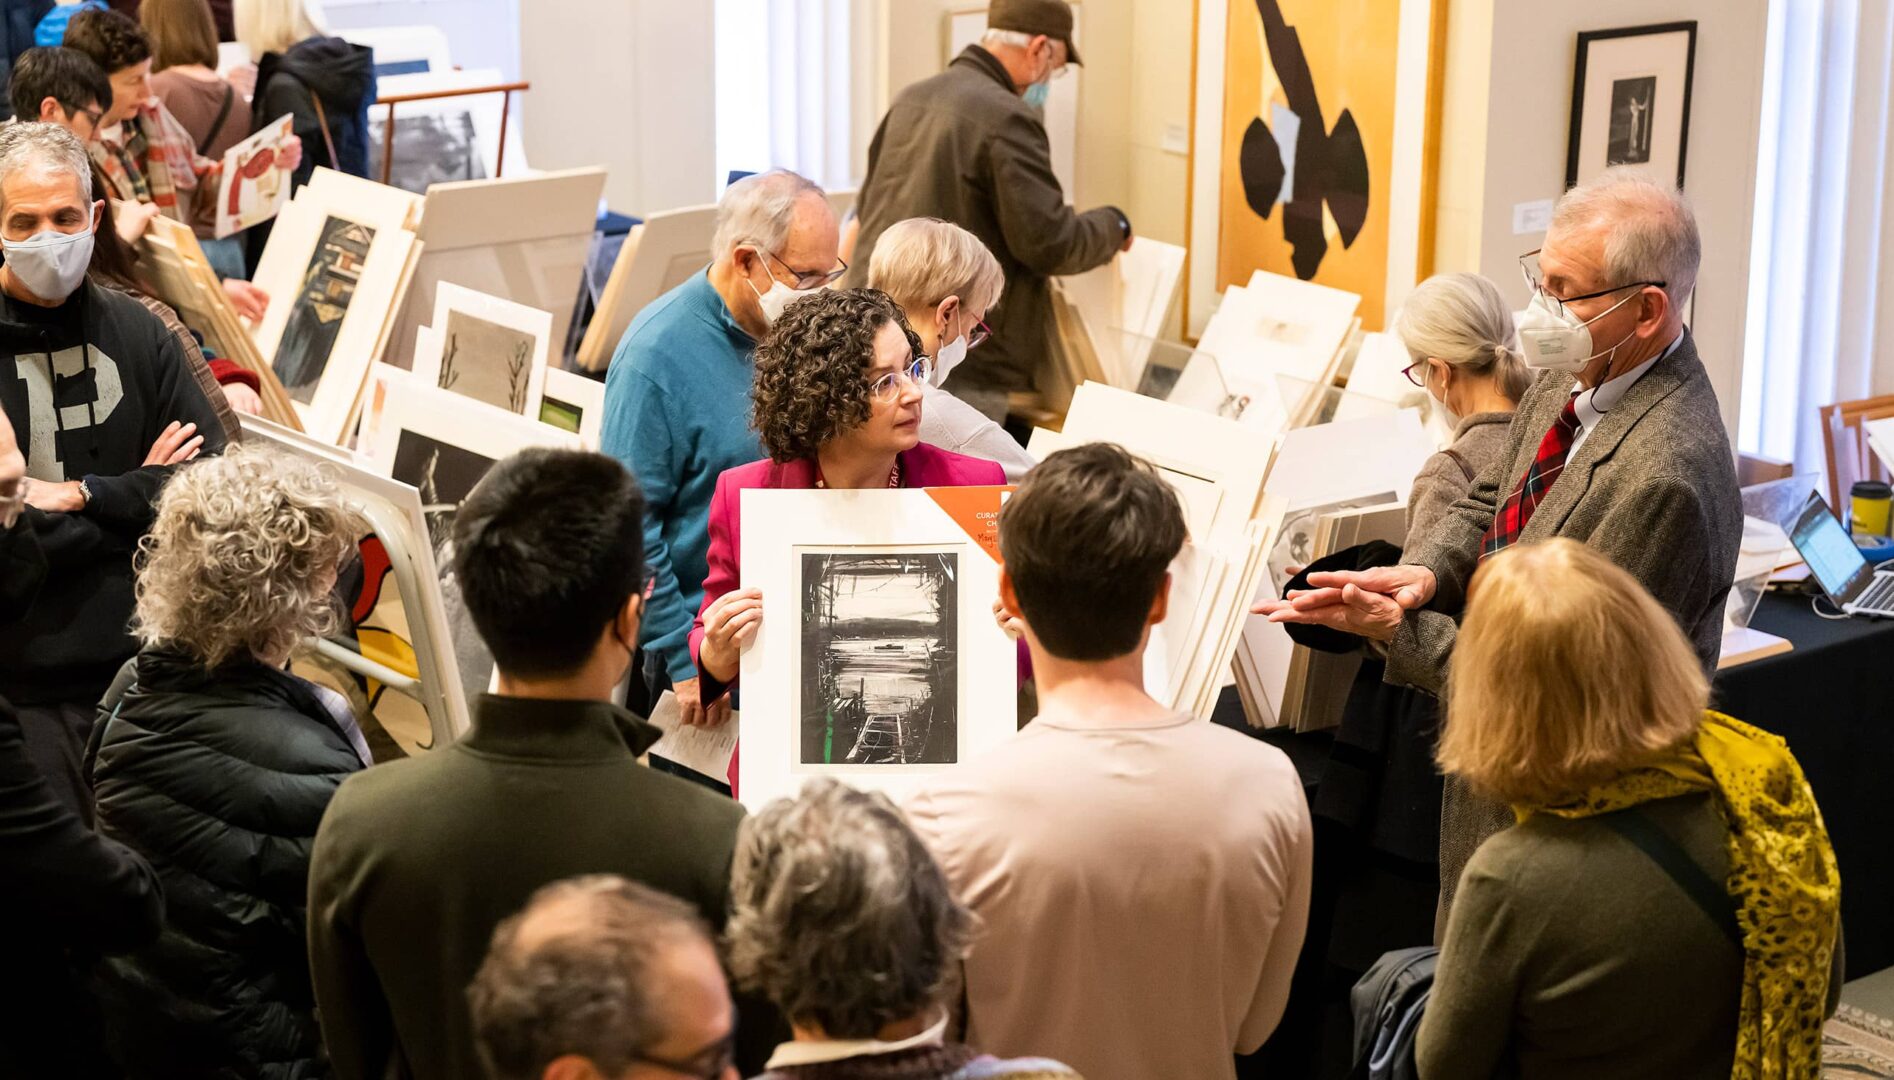 A group of people gathered around an individual holding up a print.